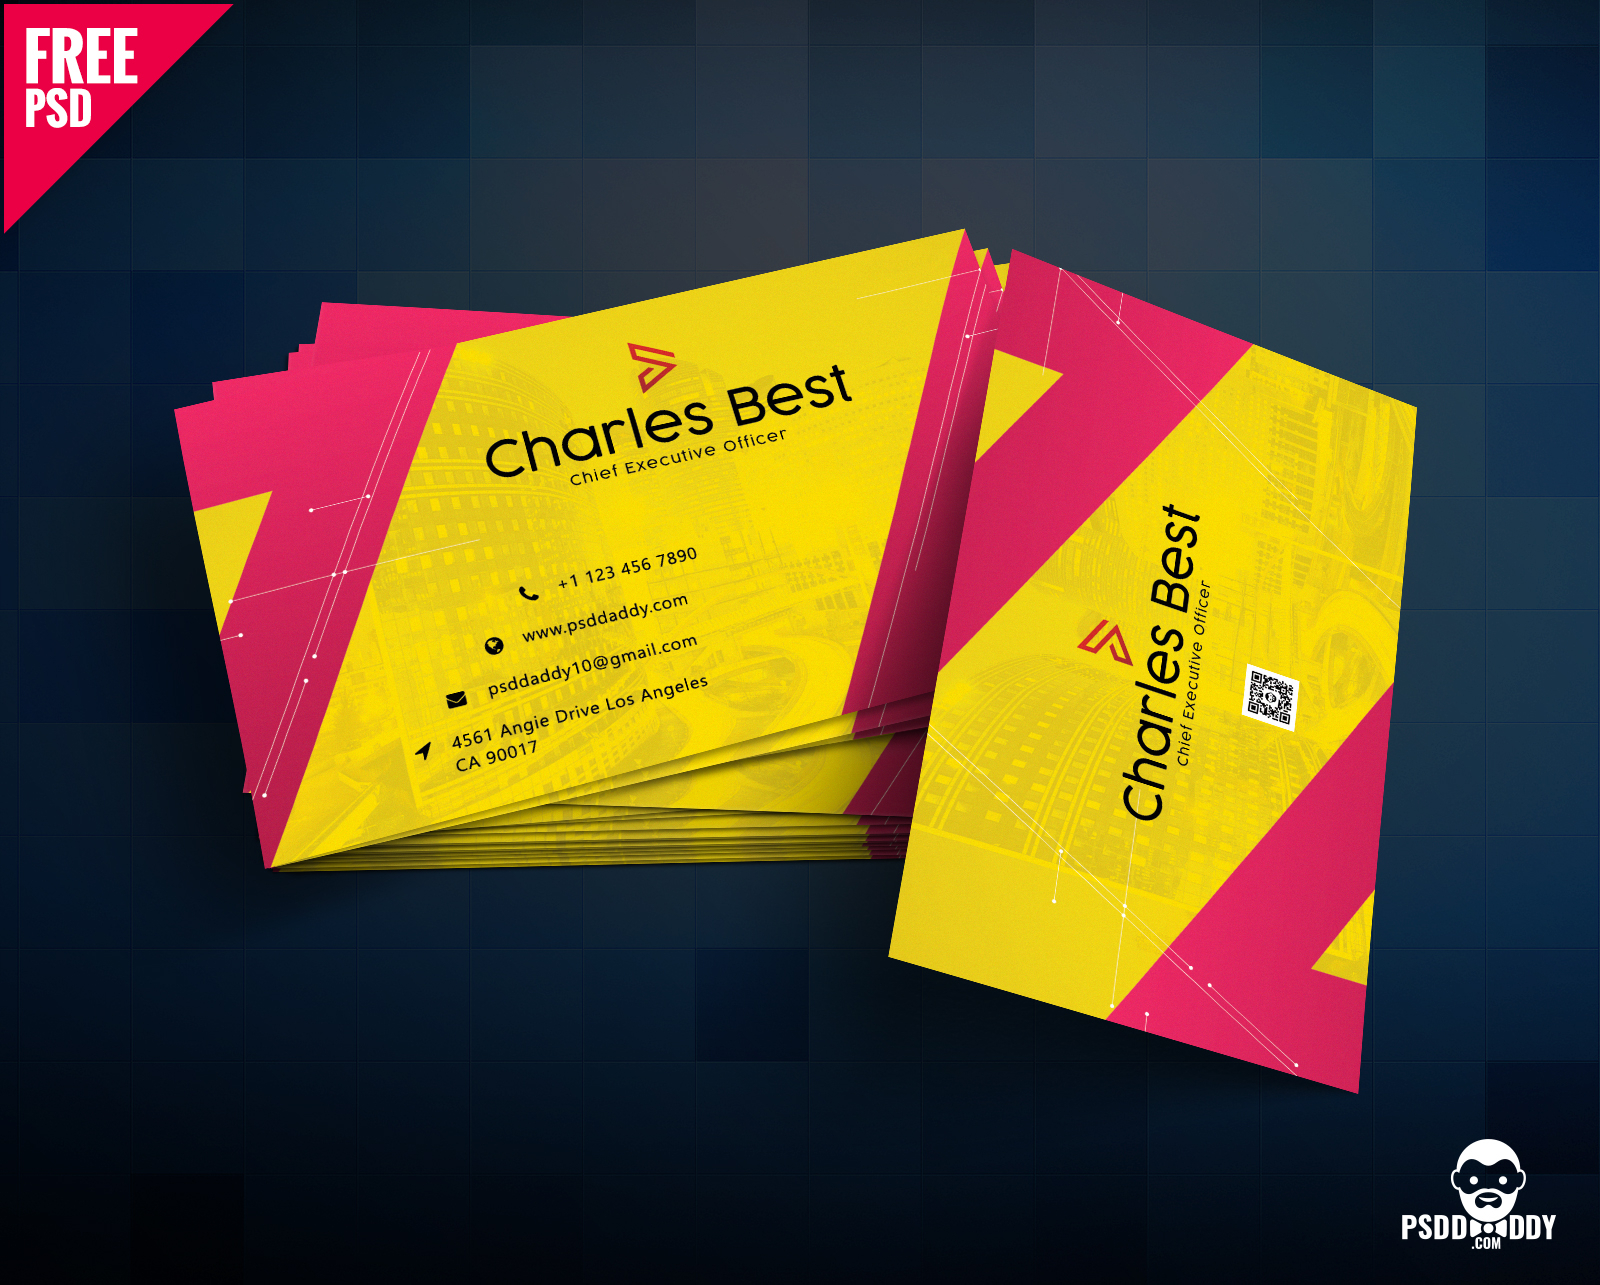 Download] Creative Business Card Free Psd | Psddaddy For Business Card Size Photoshop Template